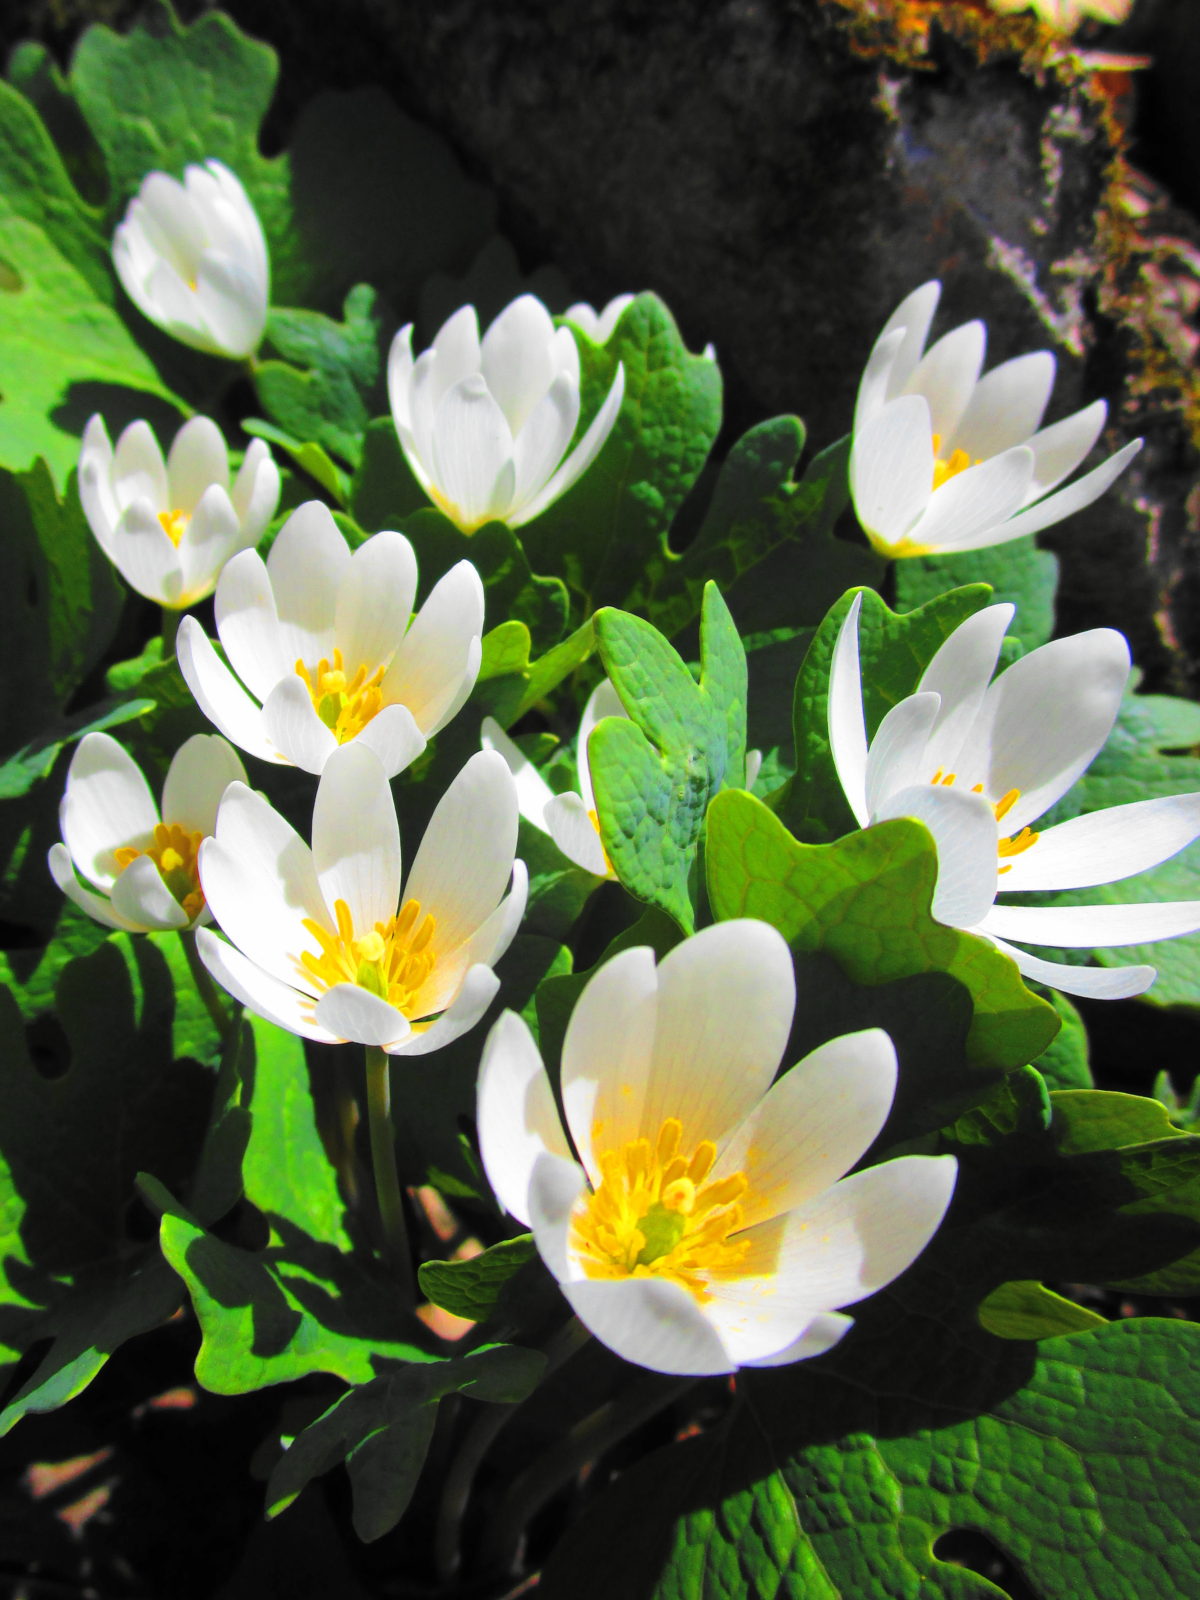 A small cluster of white bloodroot shines in the sun.